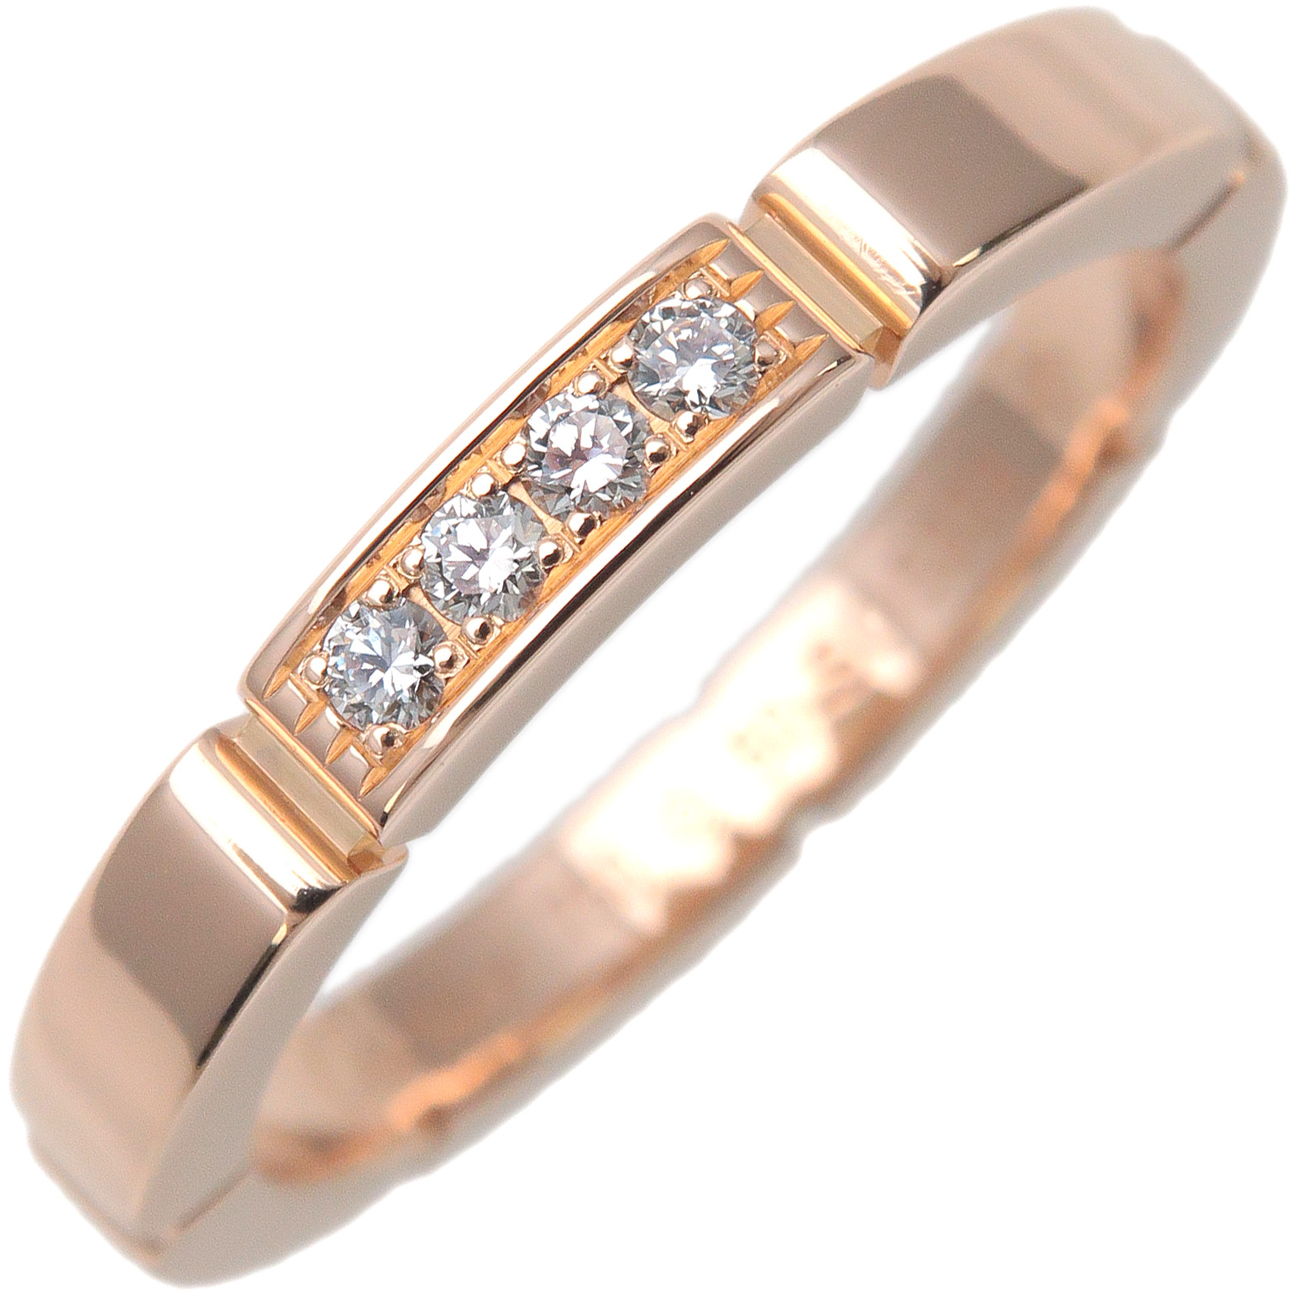 Cartier-Maillon-Panthere-4P-Diamond-Ring-K18-Rose-Gold-#50-US5-5.5